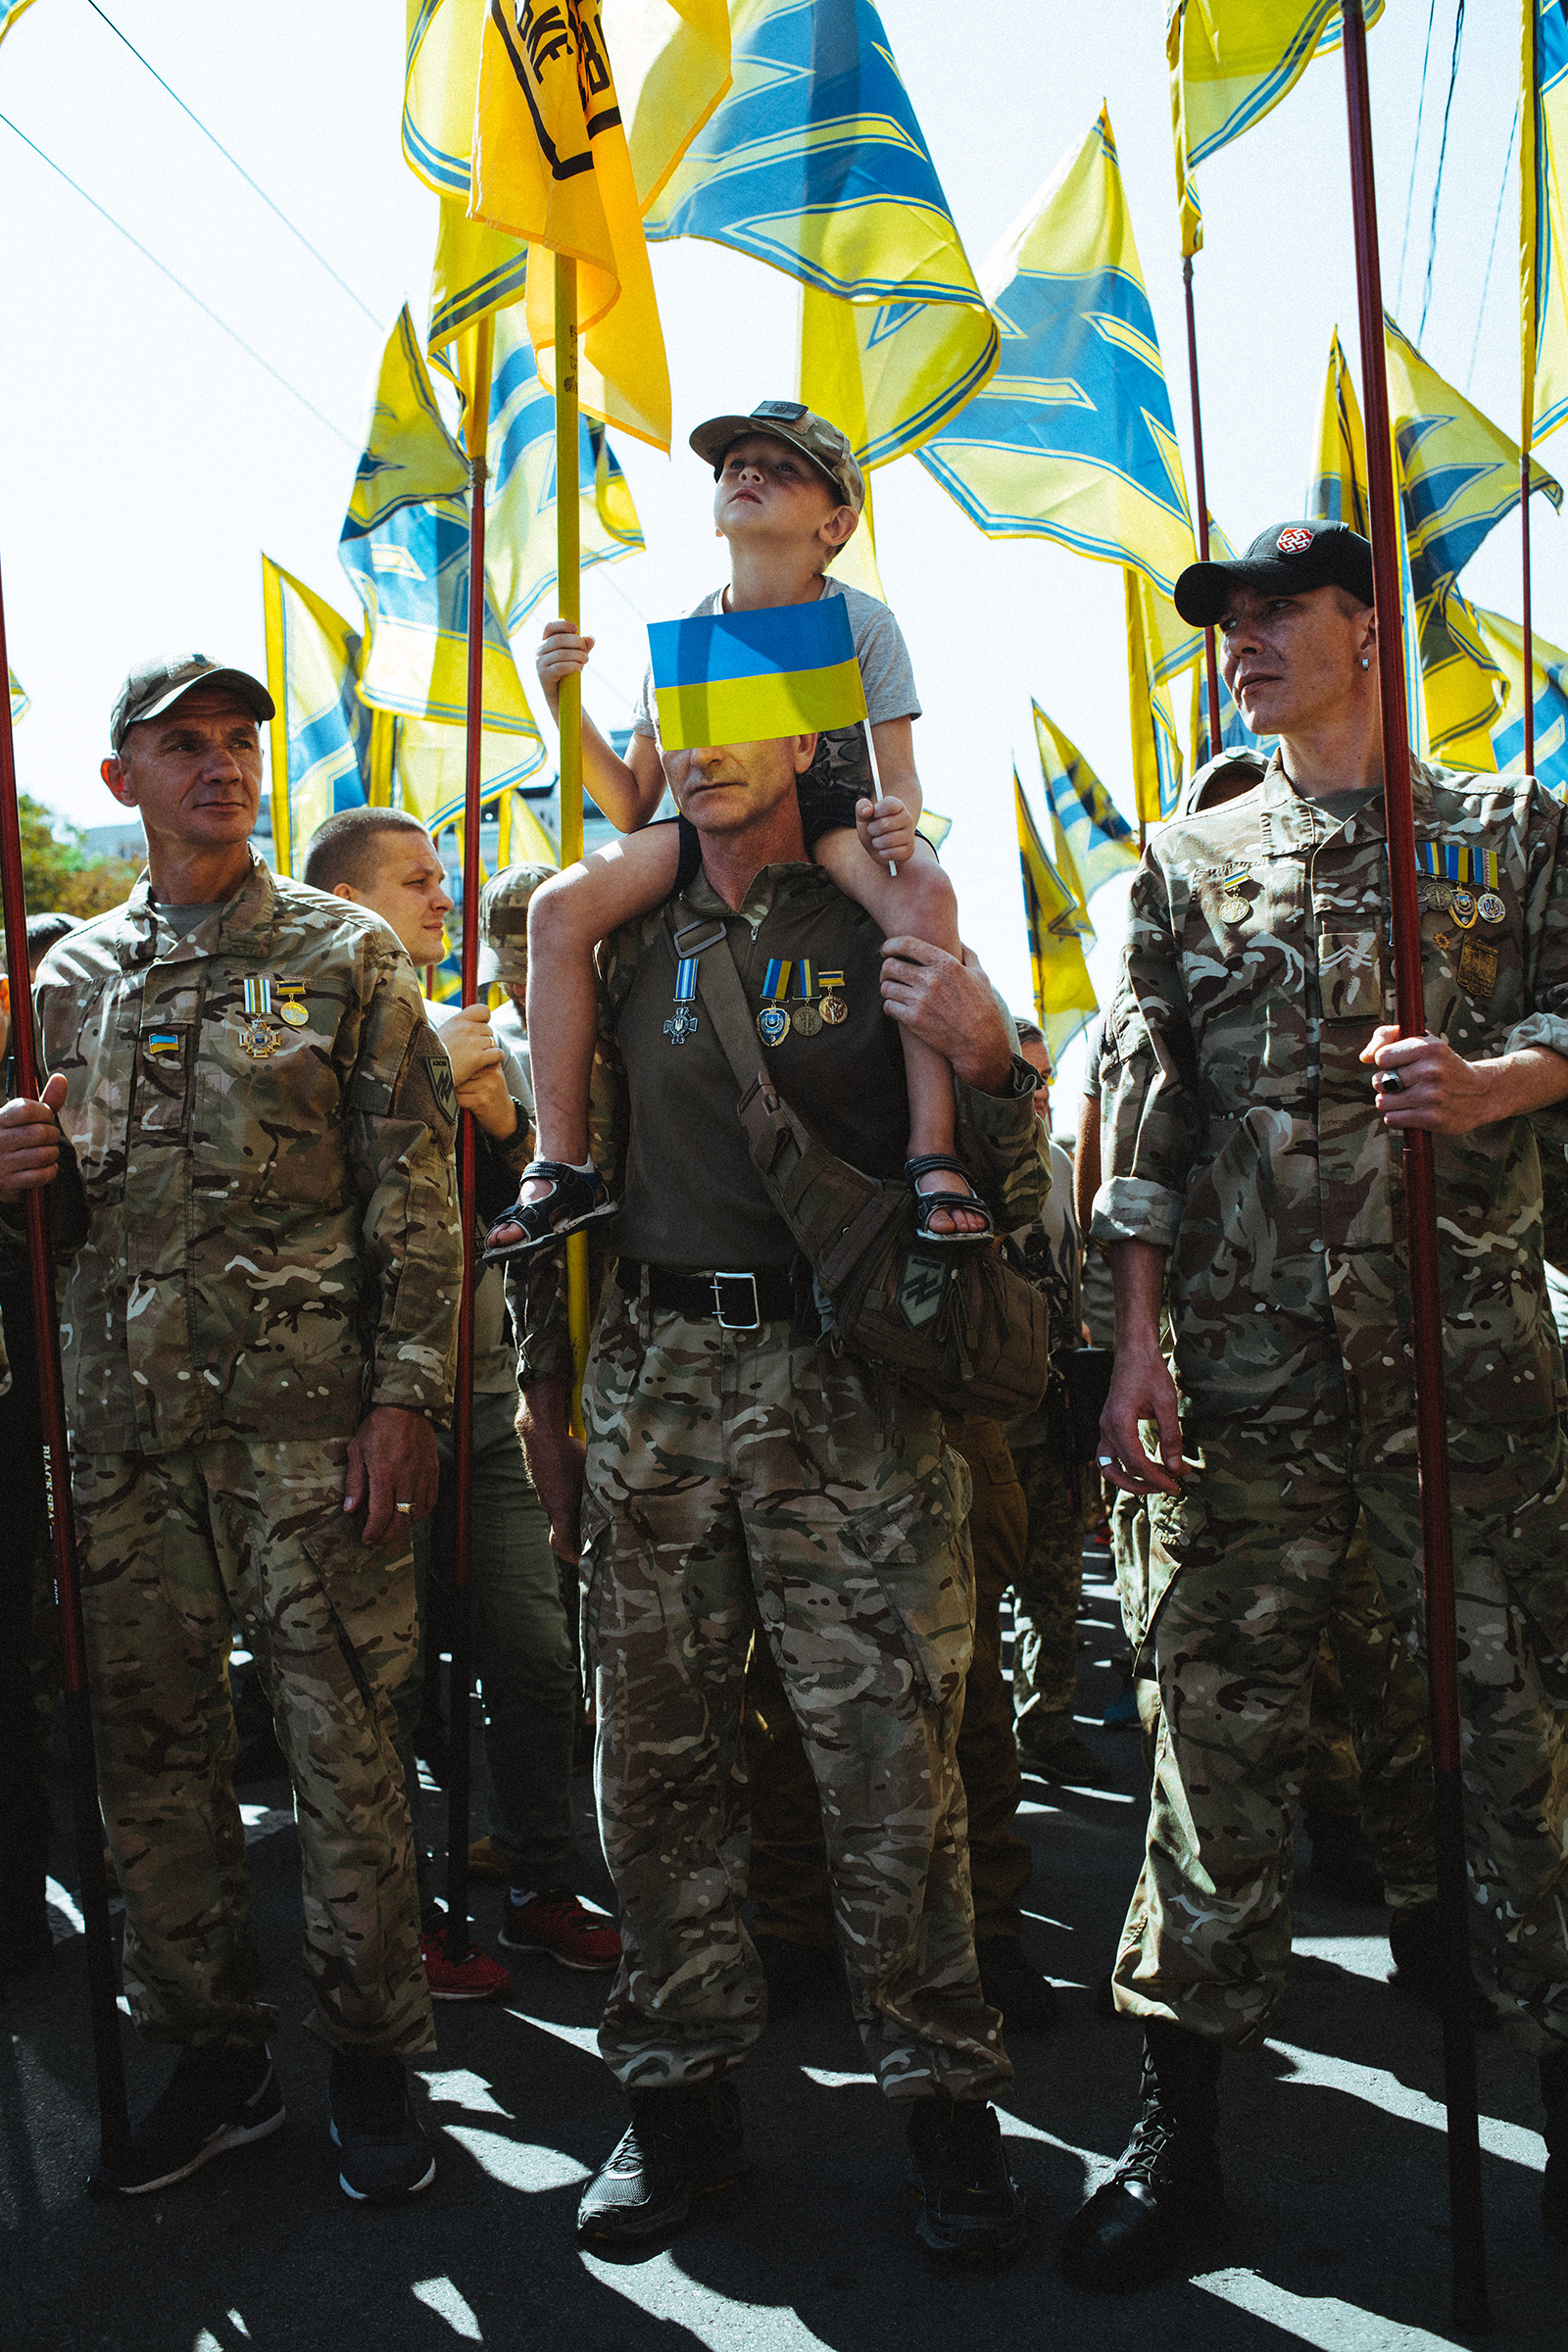 Azov Regiment veterans, whose banners carry an emblem derived from a Nazi symbol, the Wolfsangel, march in Kyiv in 2019.